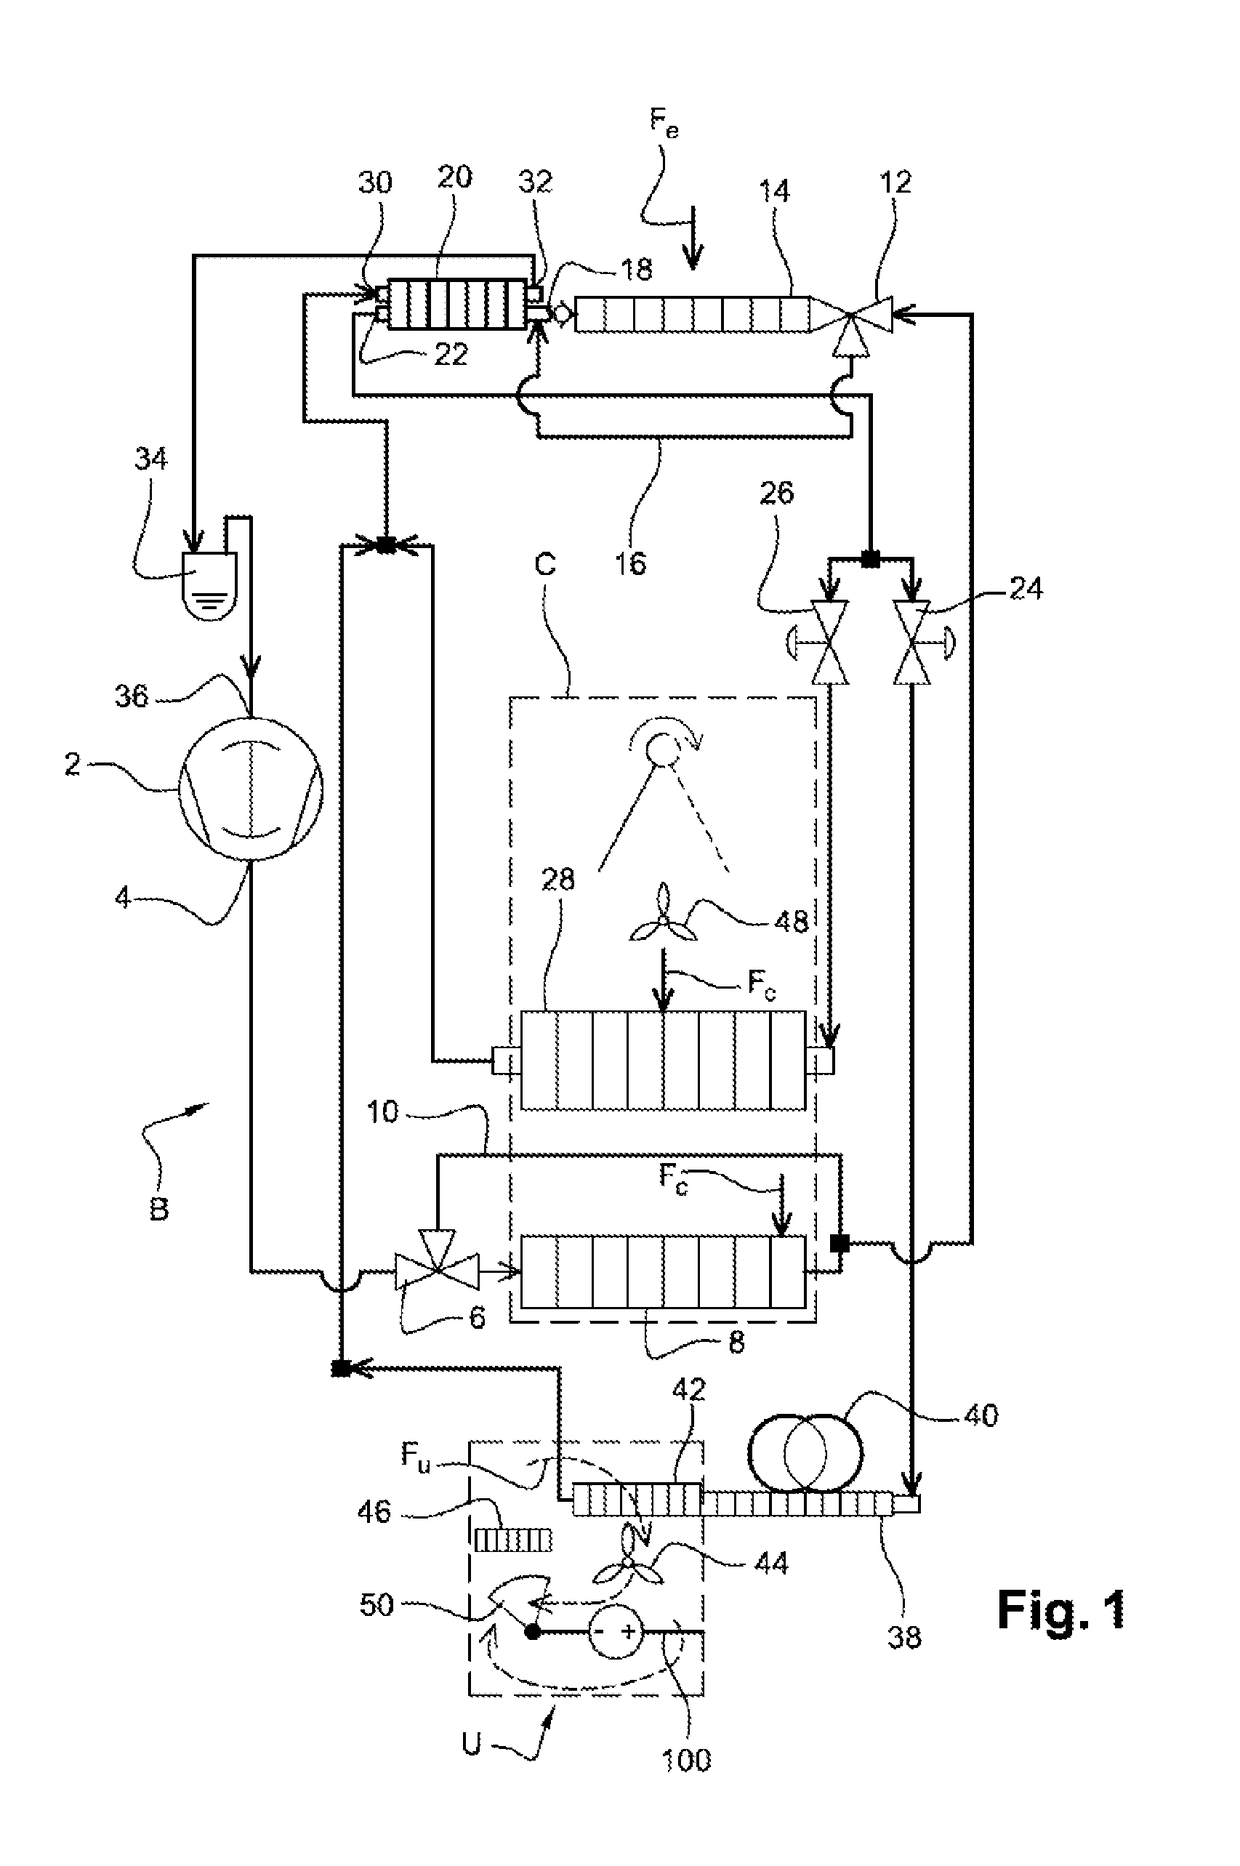 Heat conditioning system for a motor vehicle